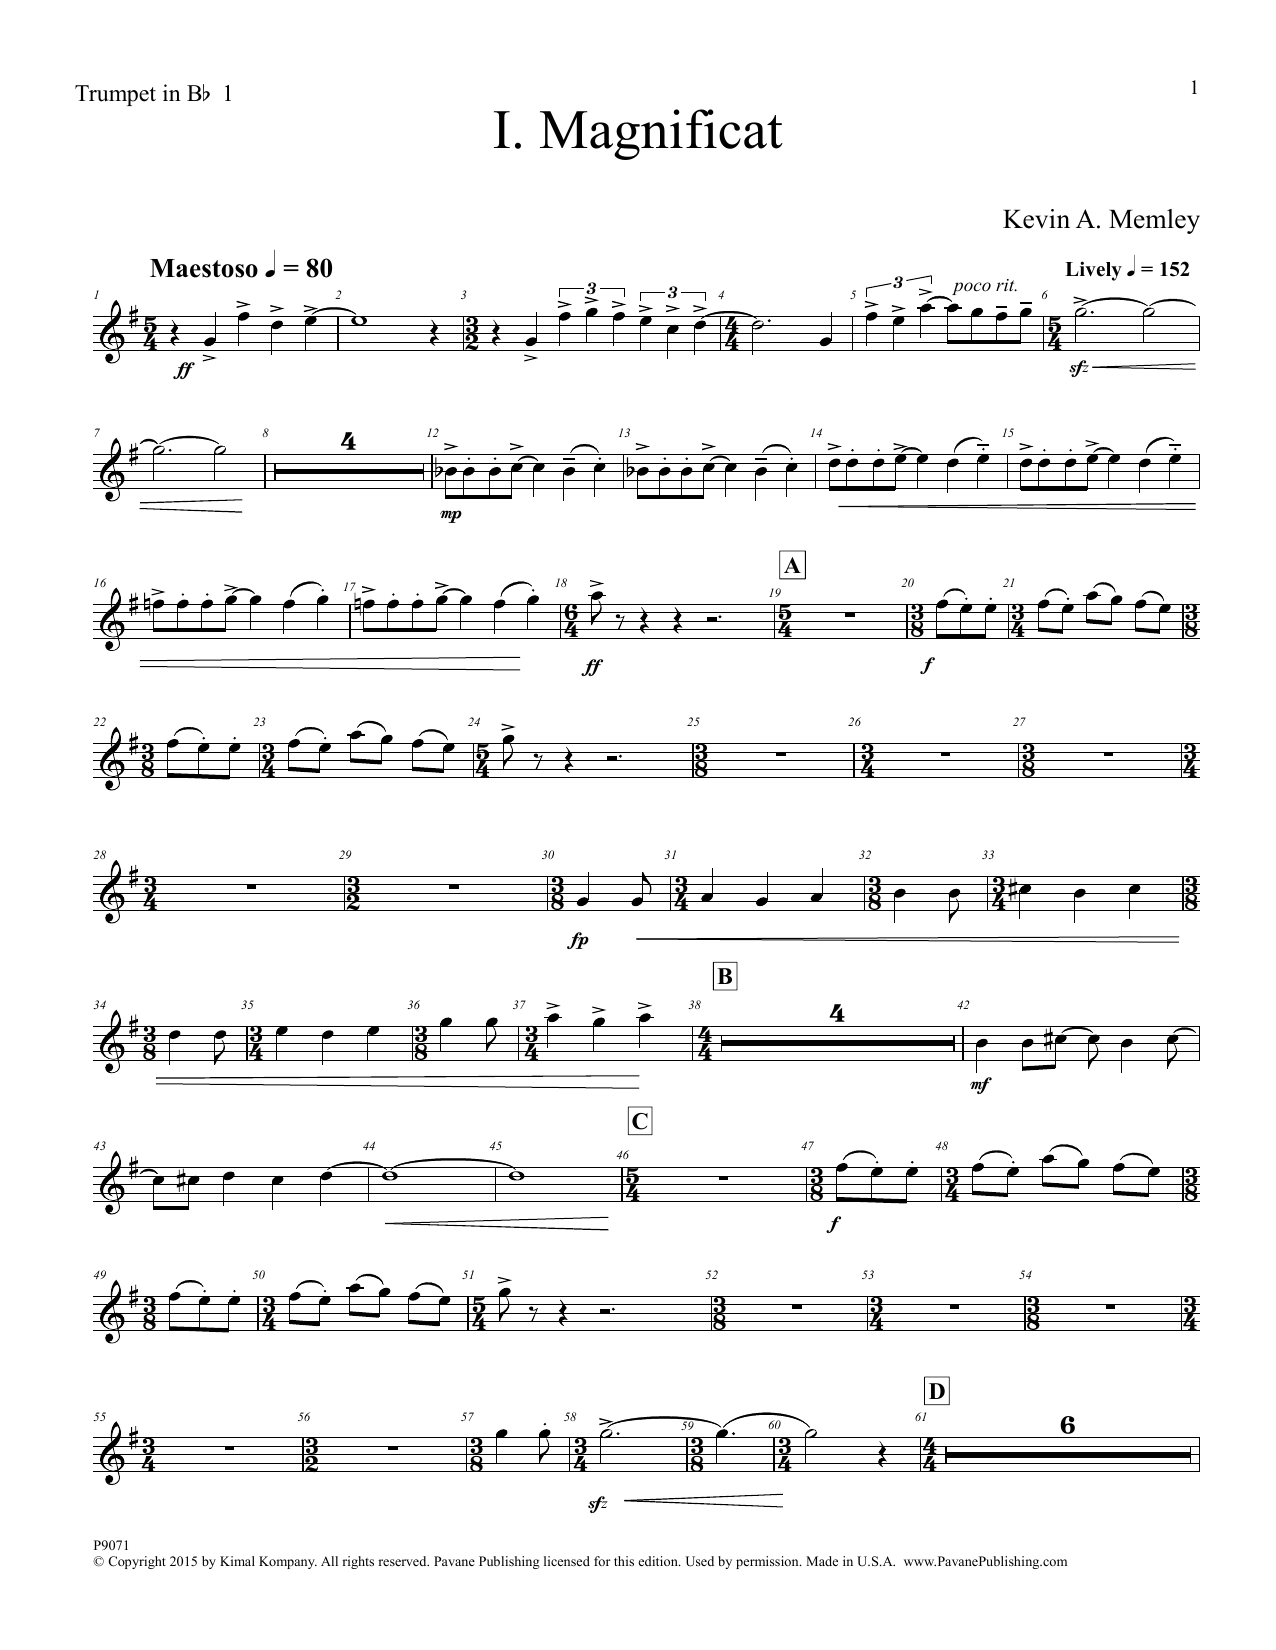 Download Kevin A. Memley Magnificat - Trumpet 1 in Bb Sheet Music